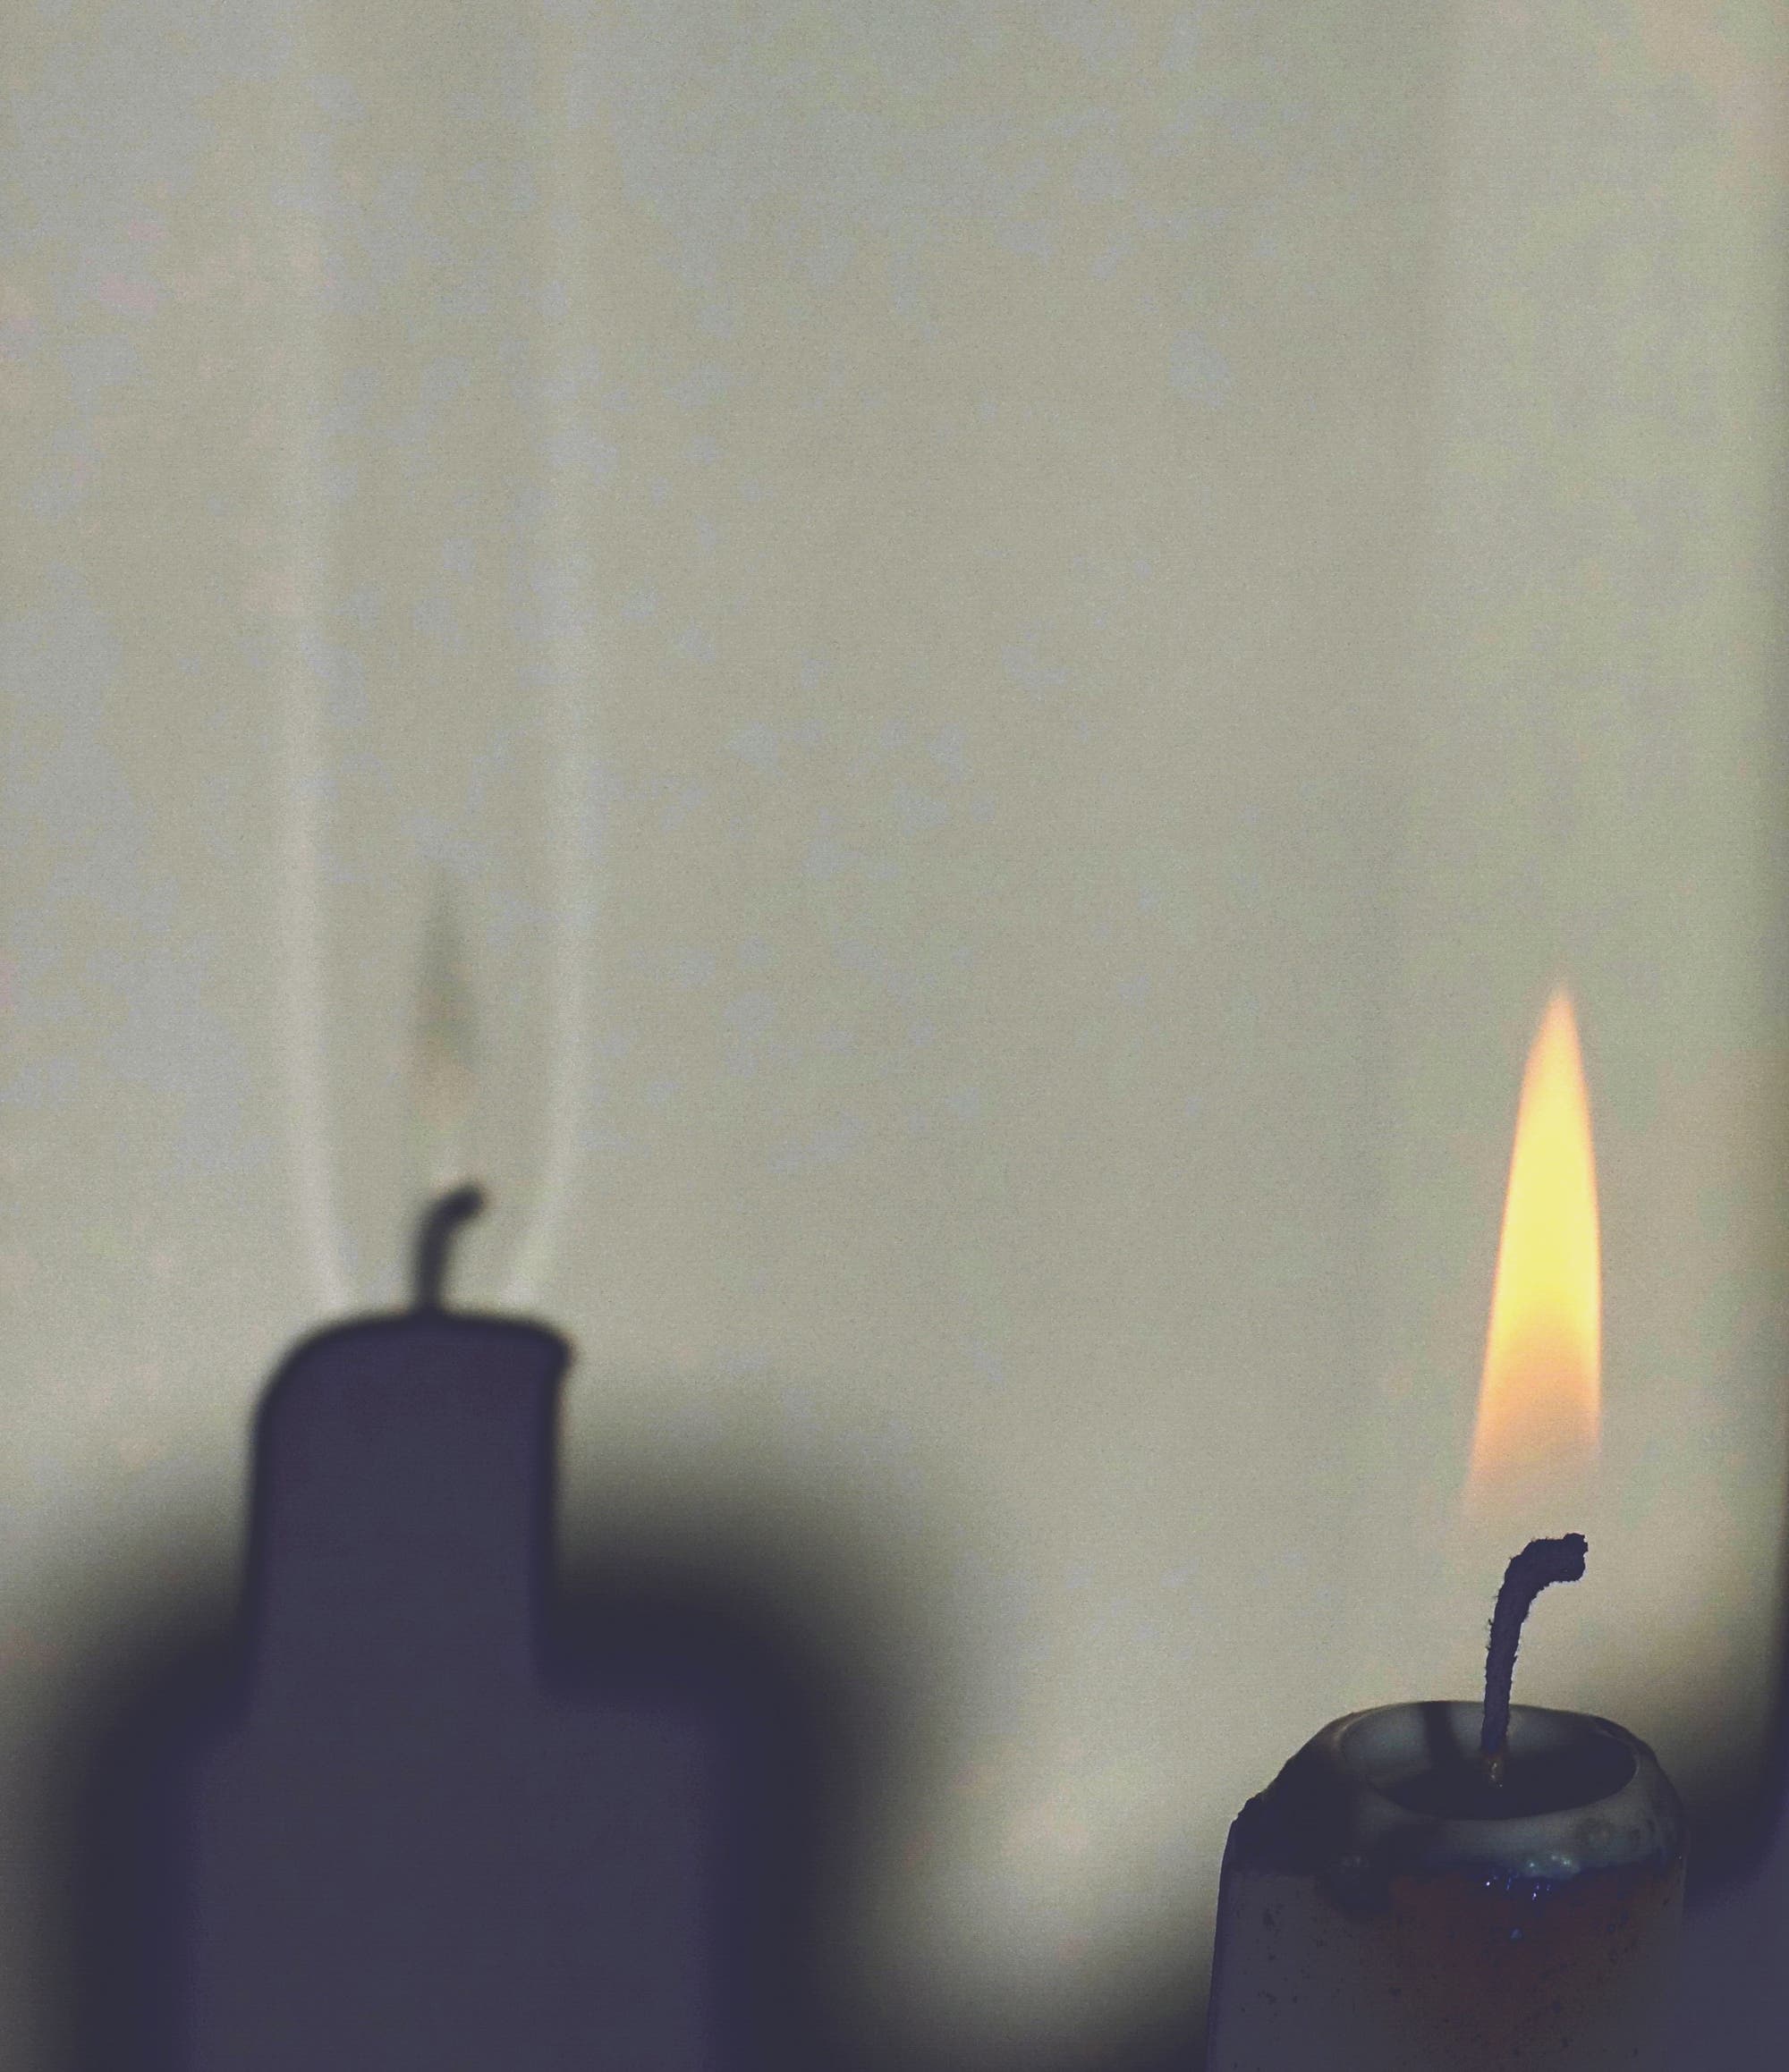 A burning candle standing in the sunlight.  On the white wall it can be seen that the shadow of the flame is surrounded by two vertical bands of light.  Above the wick is a similar bright spot.